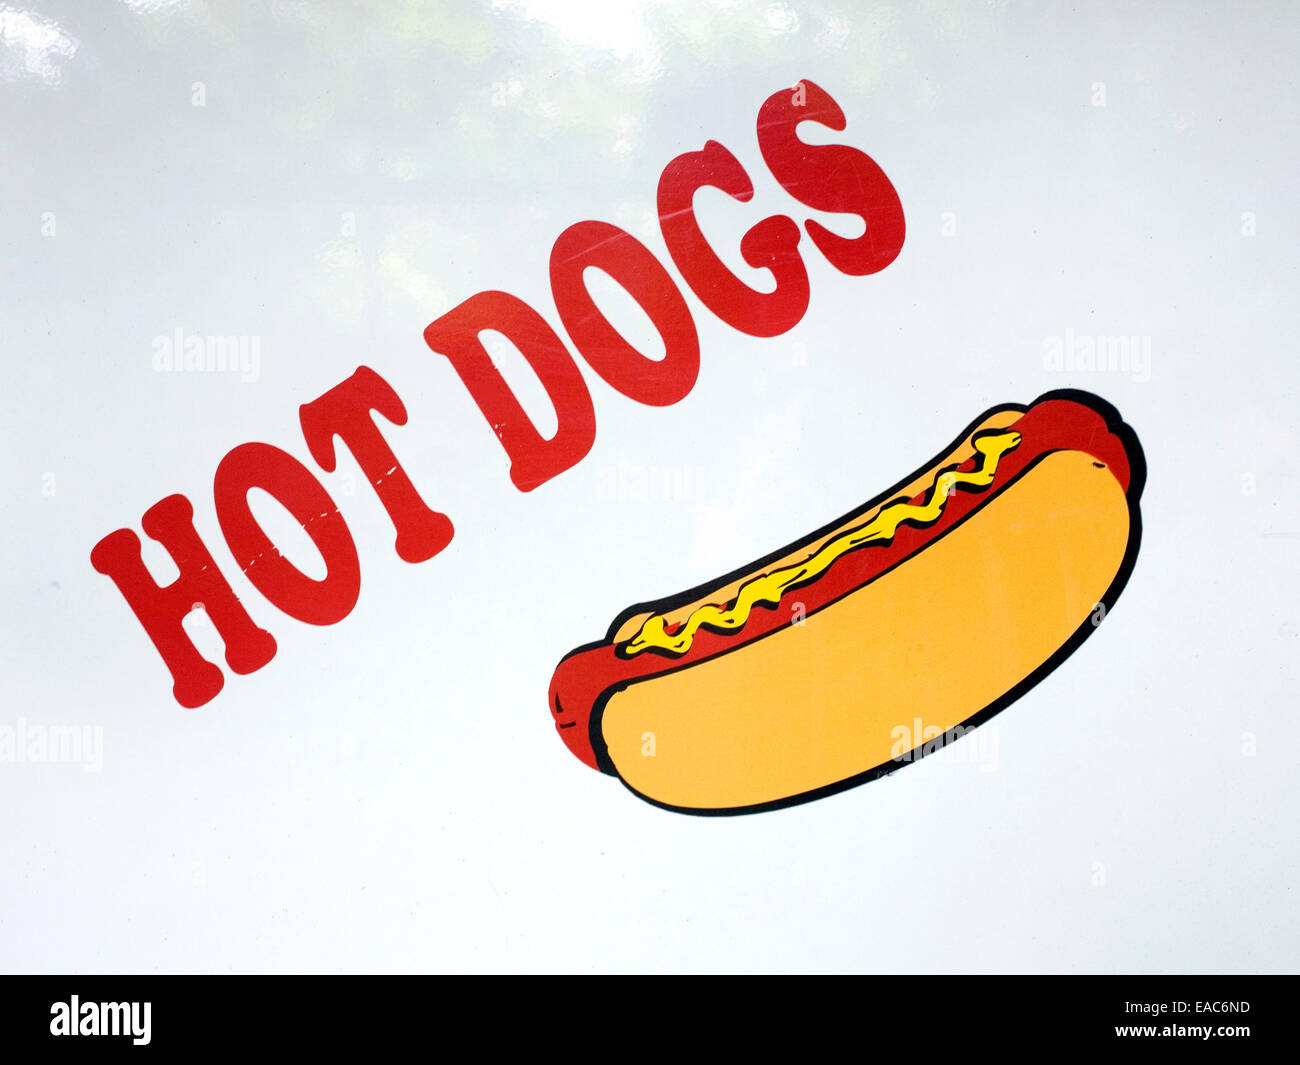 Hot dog decal on the side of truck Stock Photo